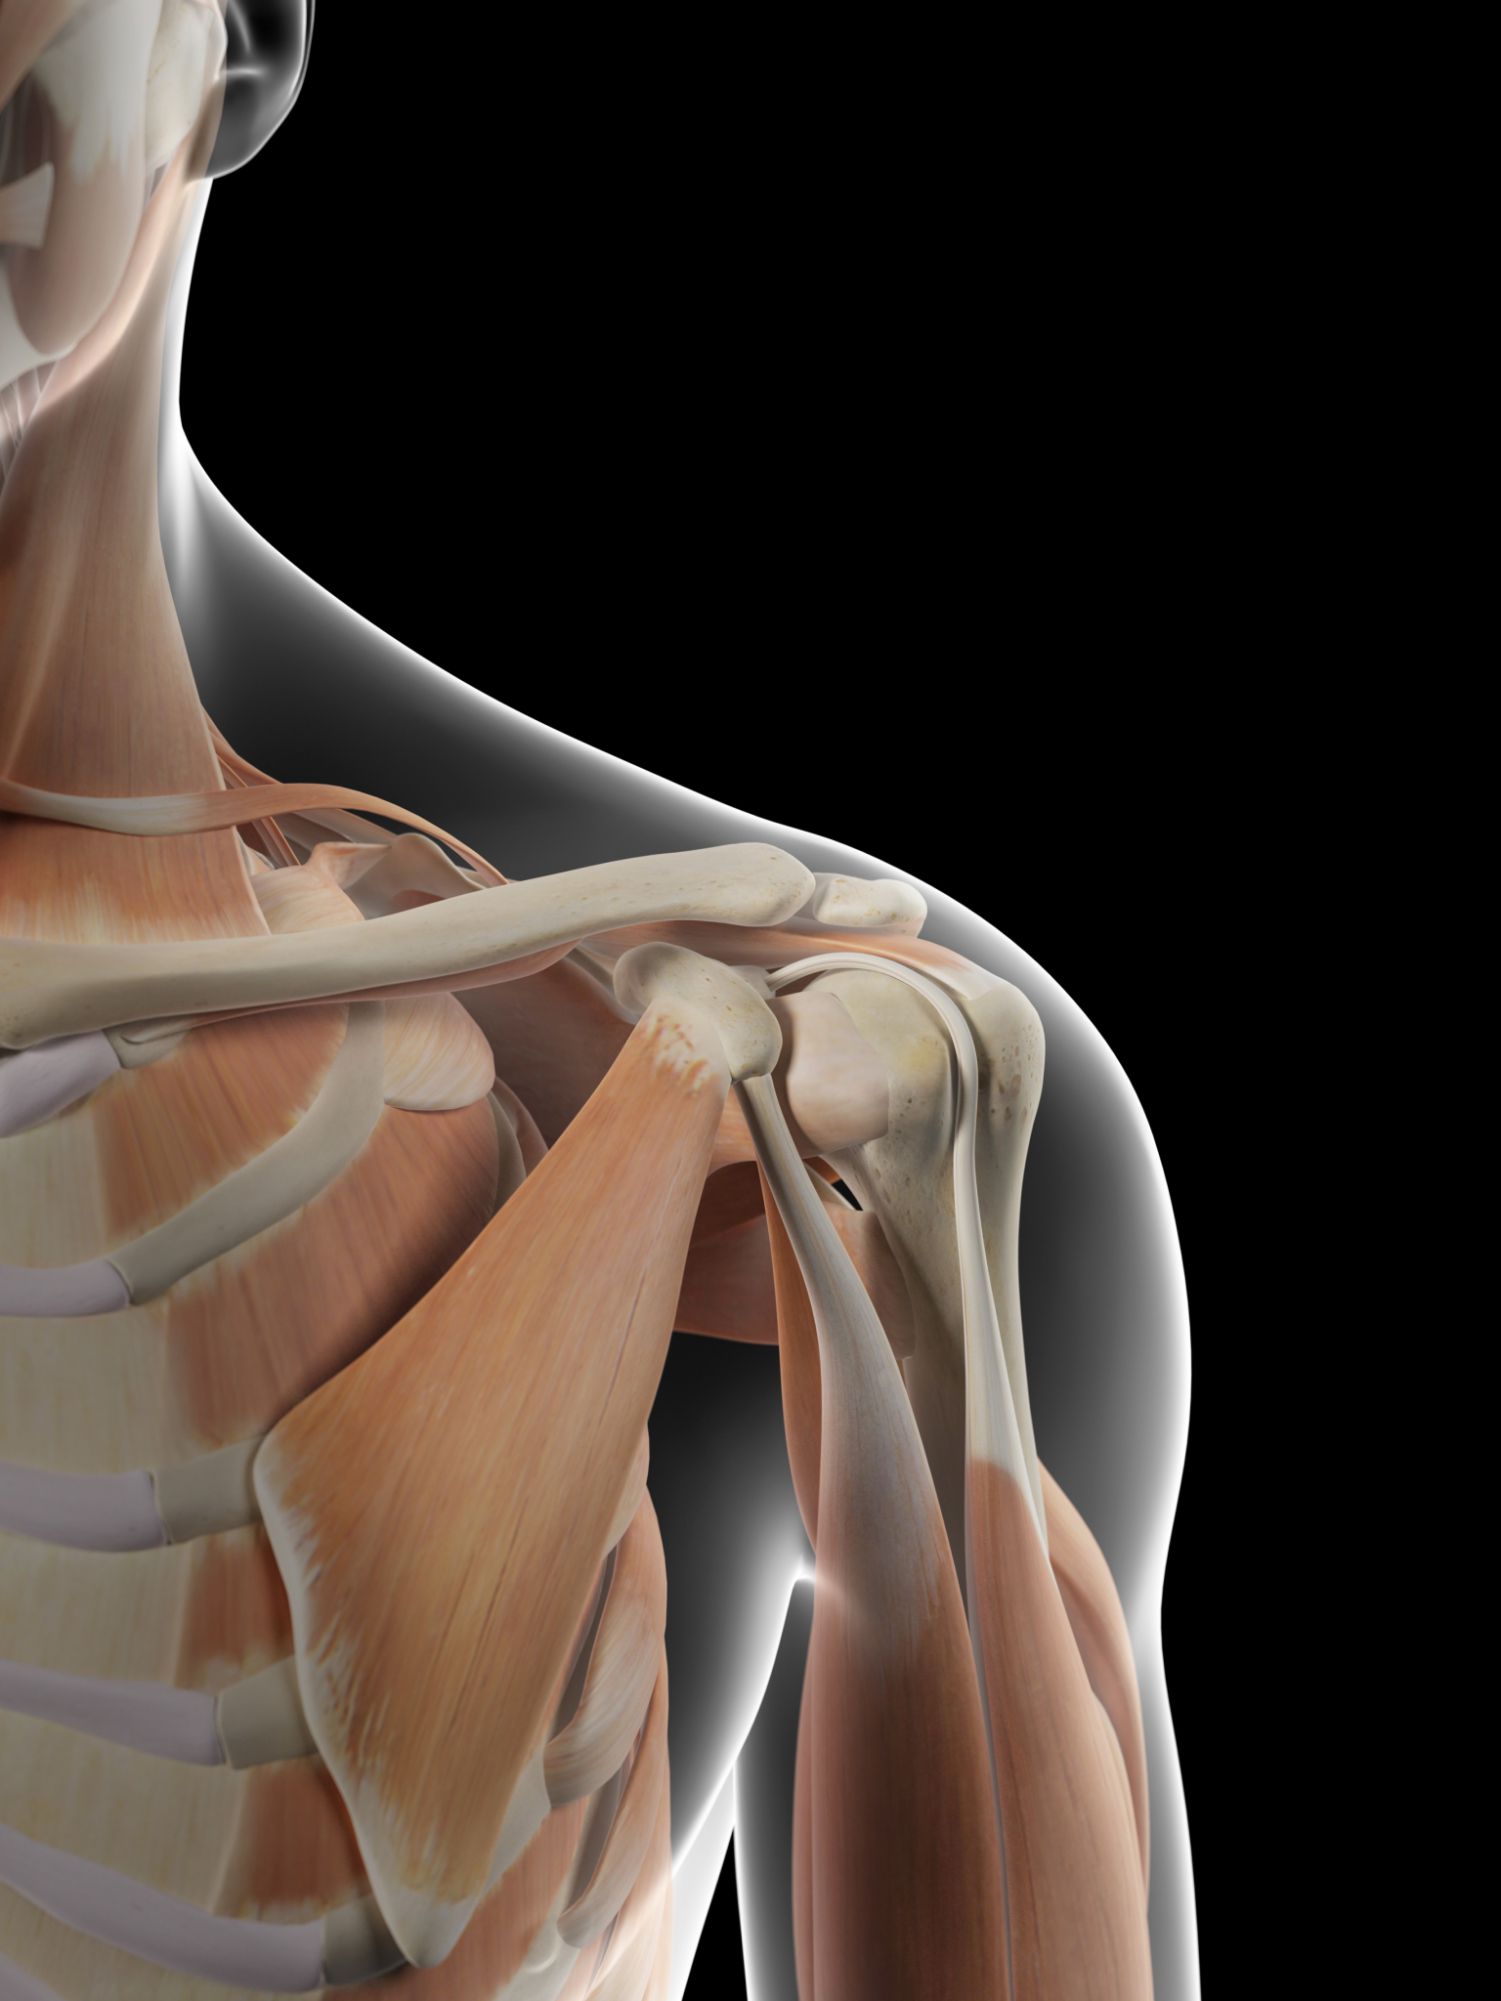 Anatomy of the Human Shoulder Joint